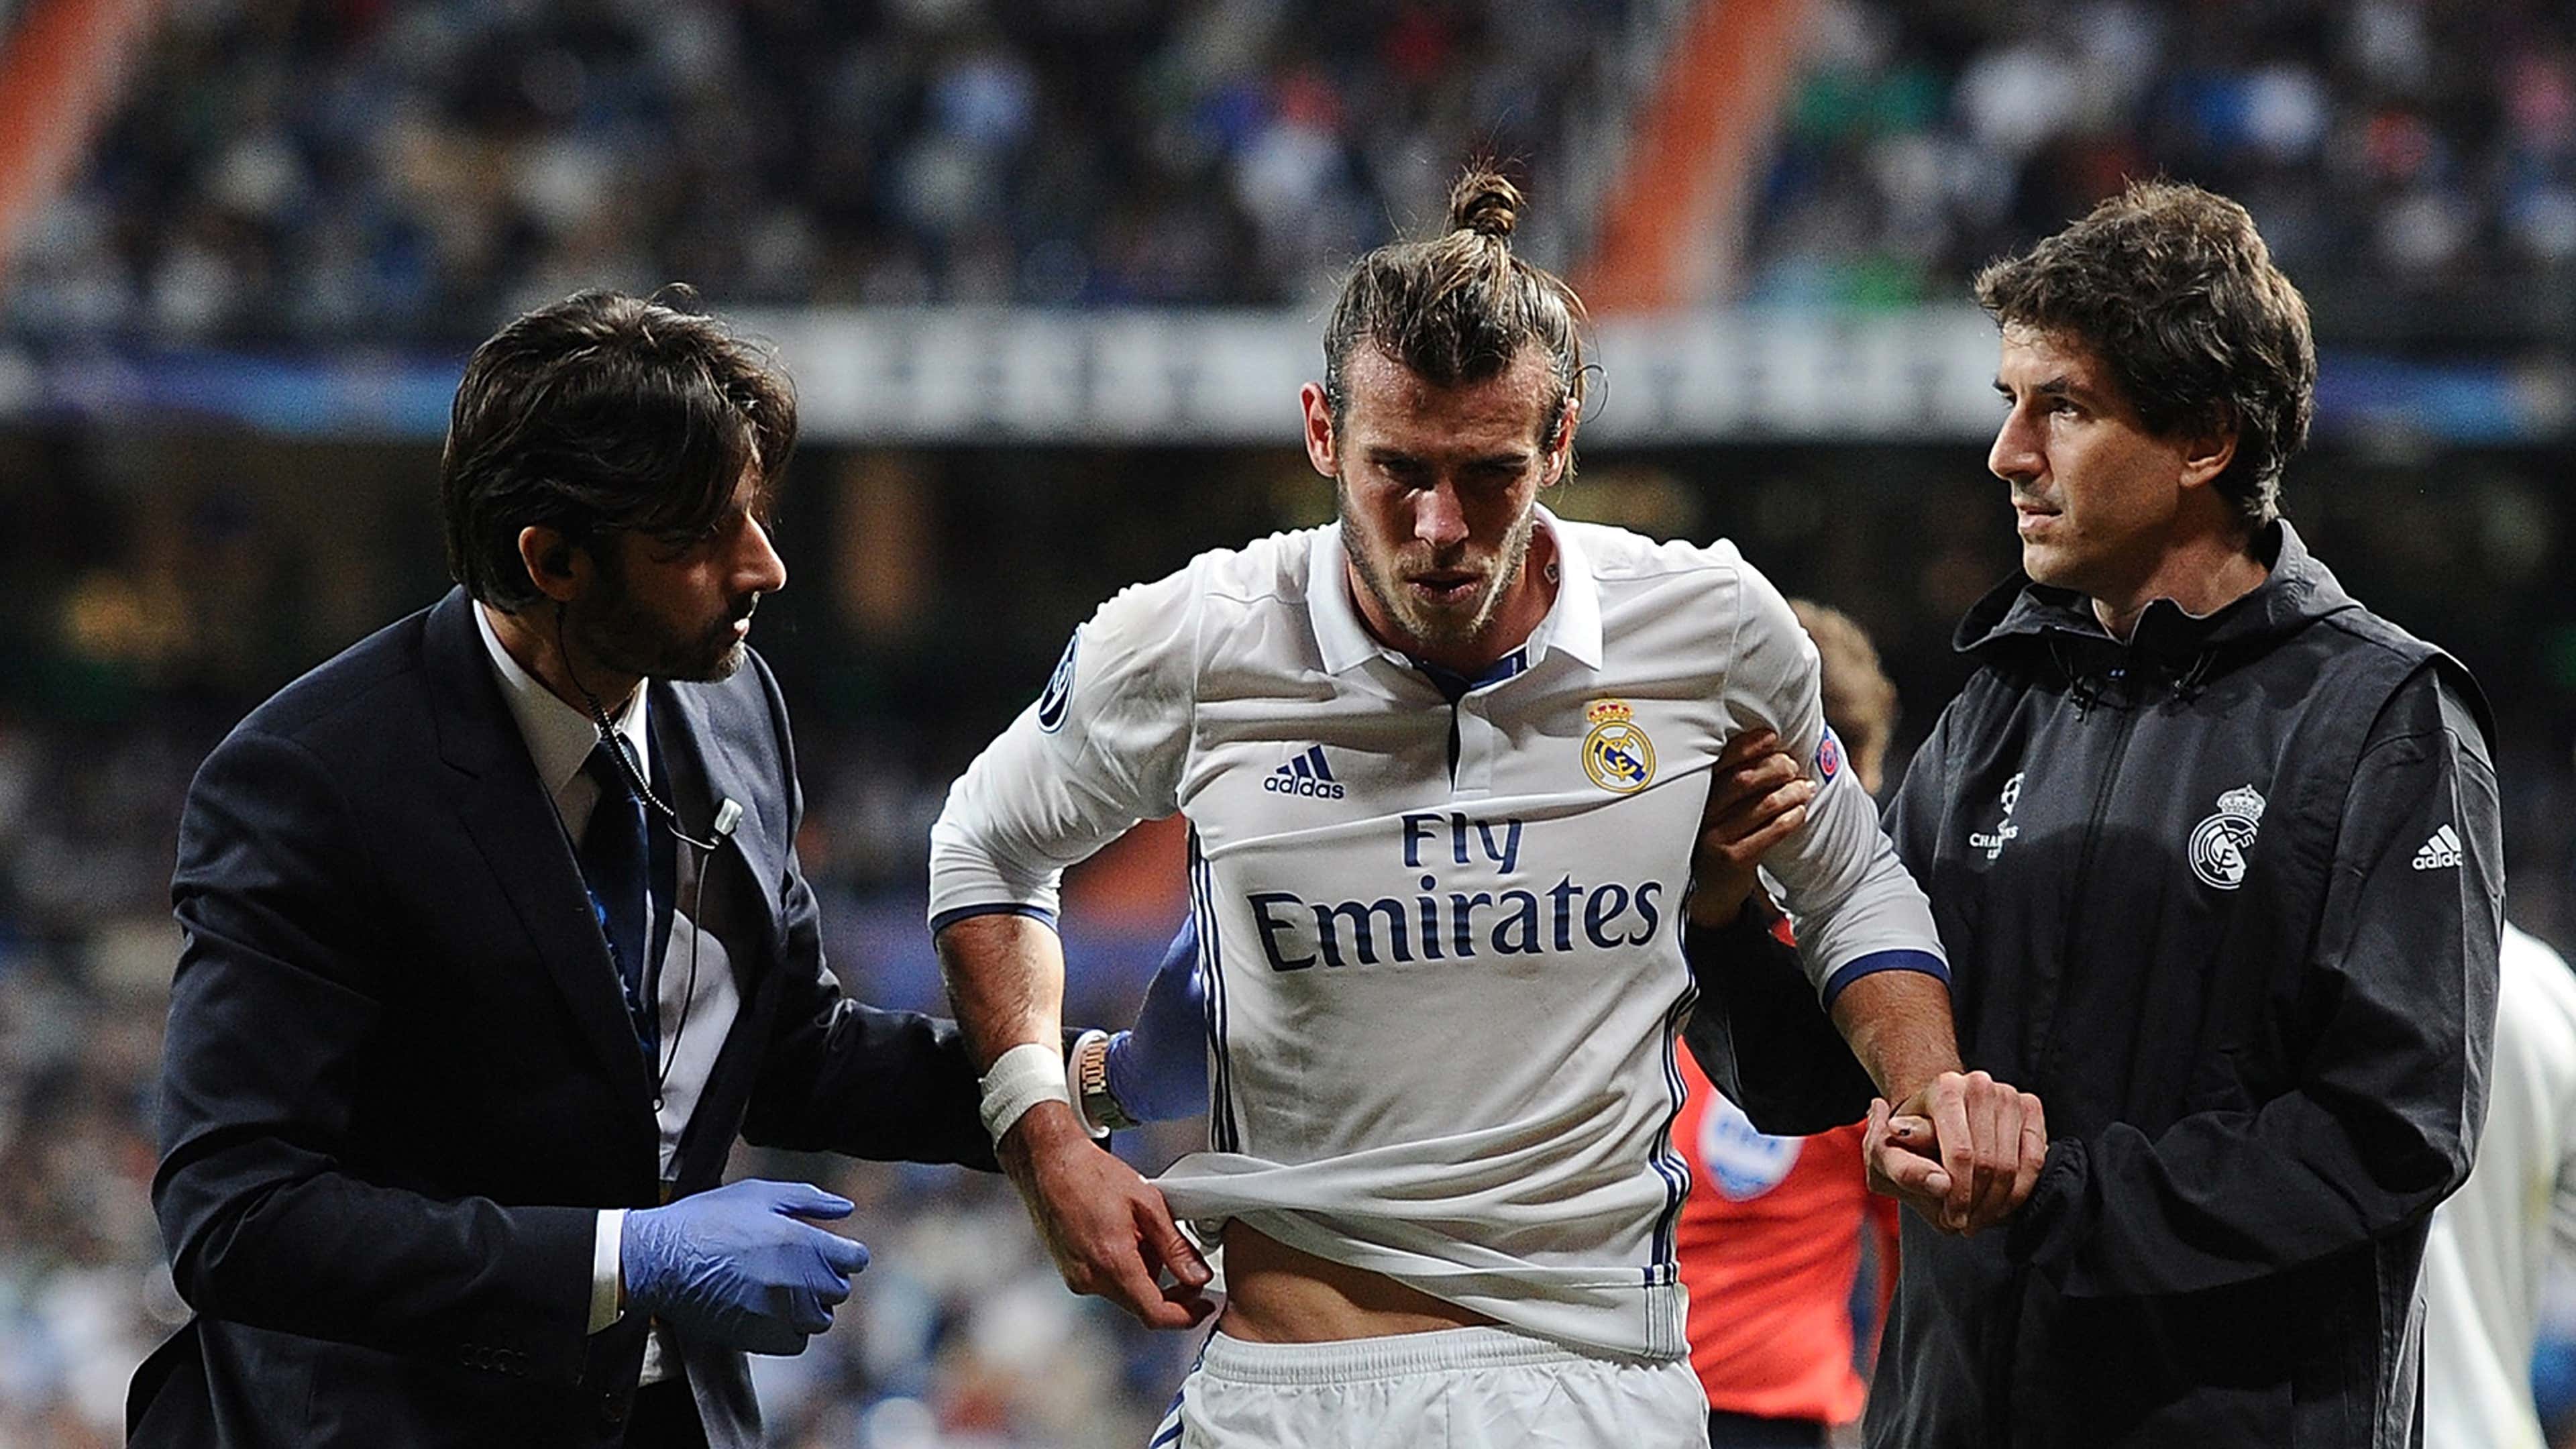 Gareth Bale retires: The numbers behind a rema